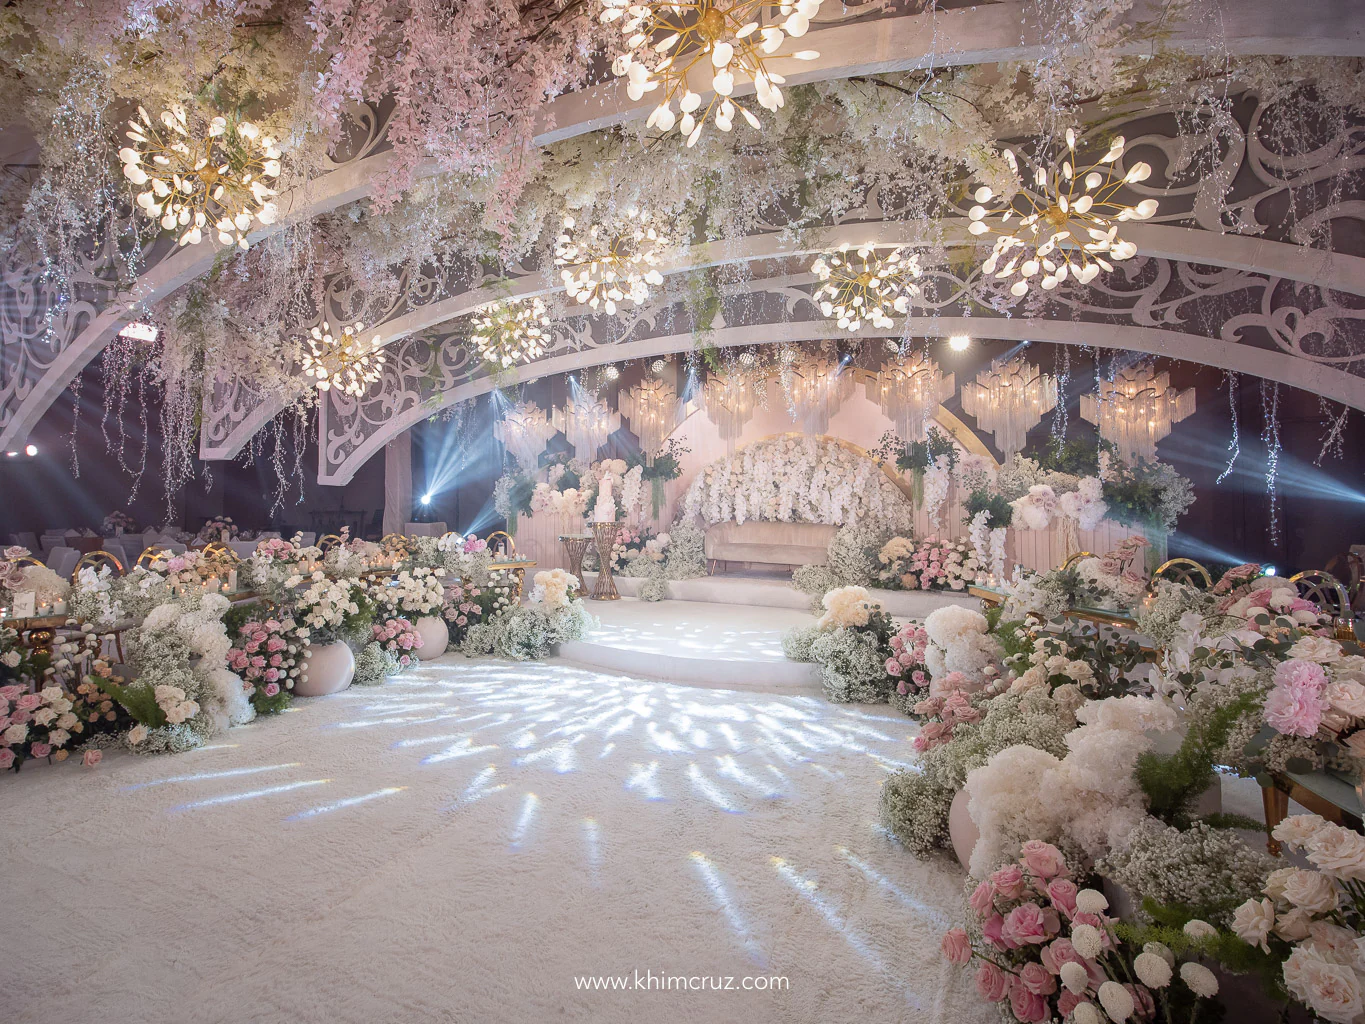 garden-inspired intimate wedding with ceiling arches and chandeliers designed by Khim Cruz